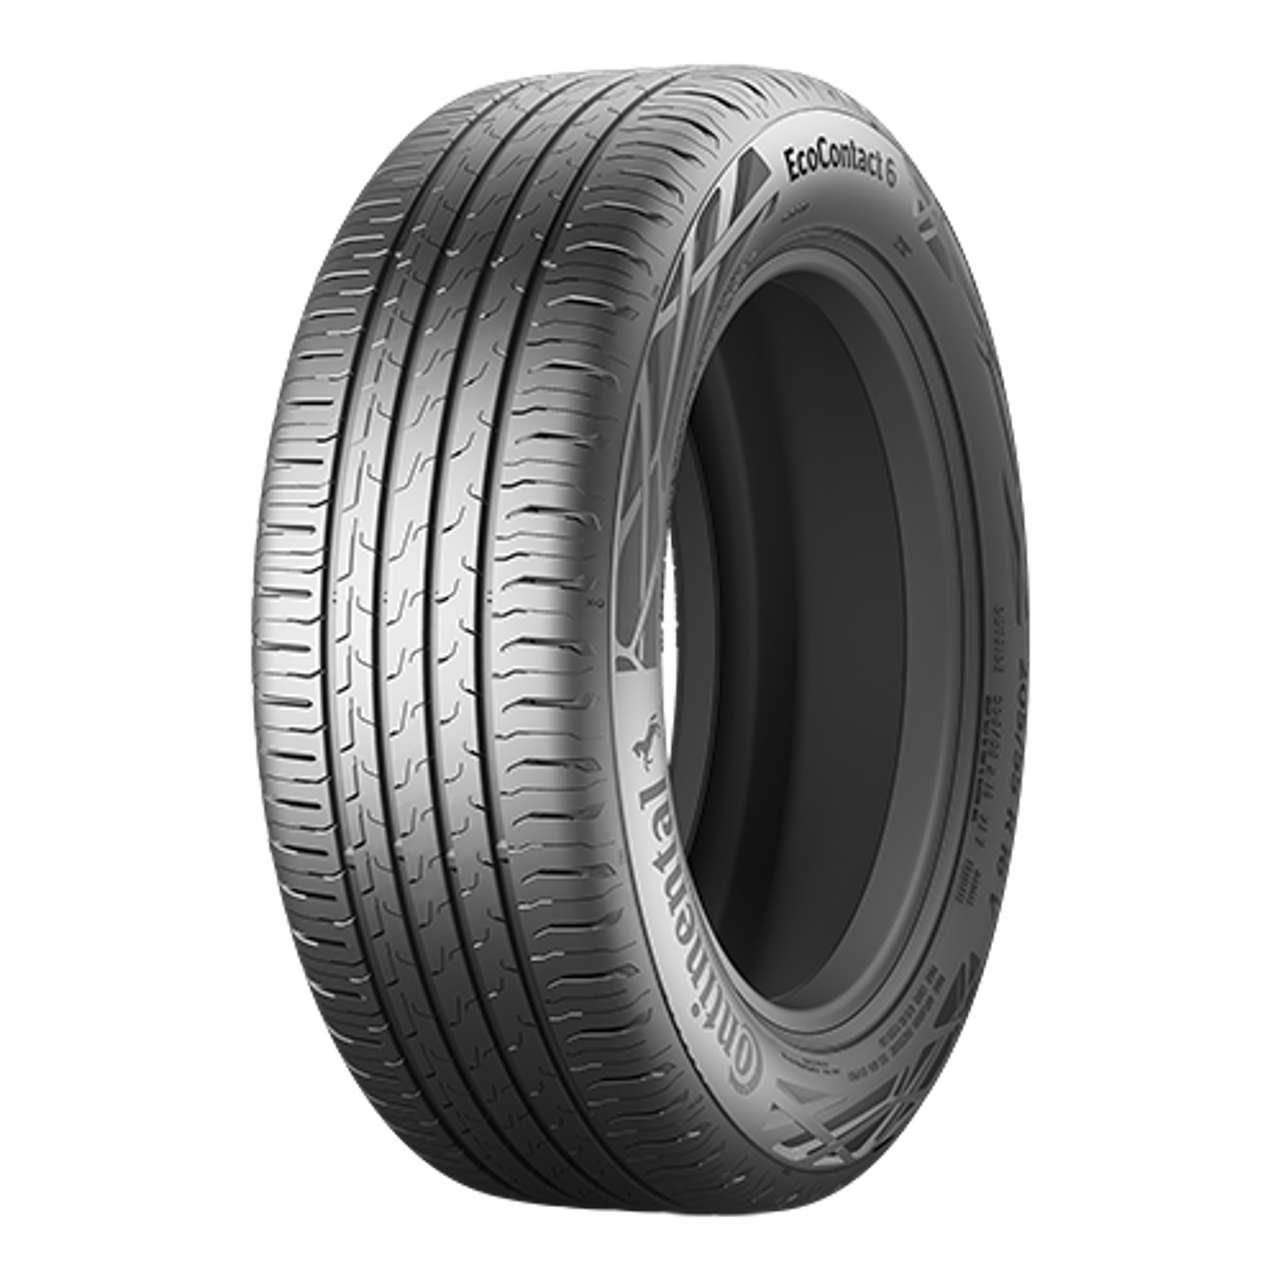 CONTINENTAL ECOCONTACT 6 (MO) (EVc) 225/45R18 91W